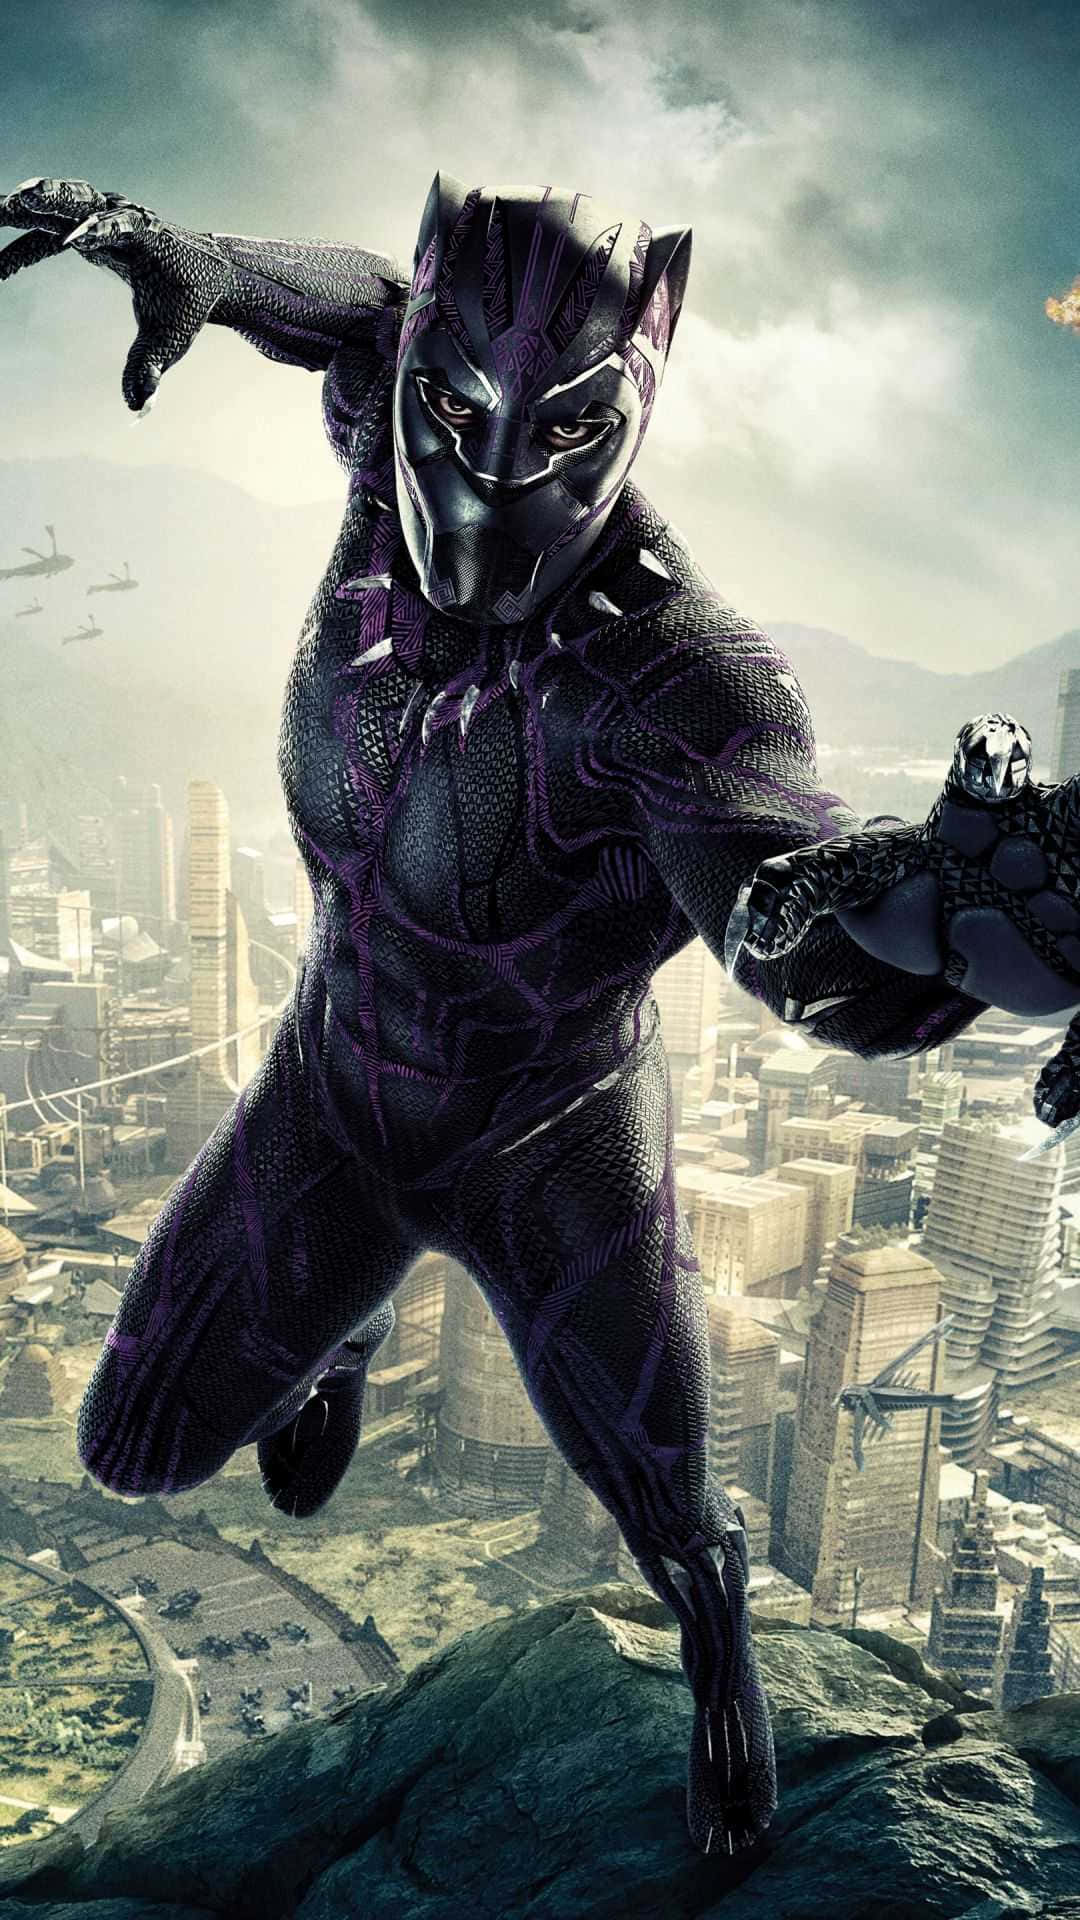 Black Panther Movie Official Poster Wallpapers